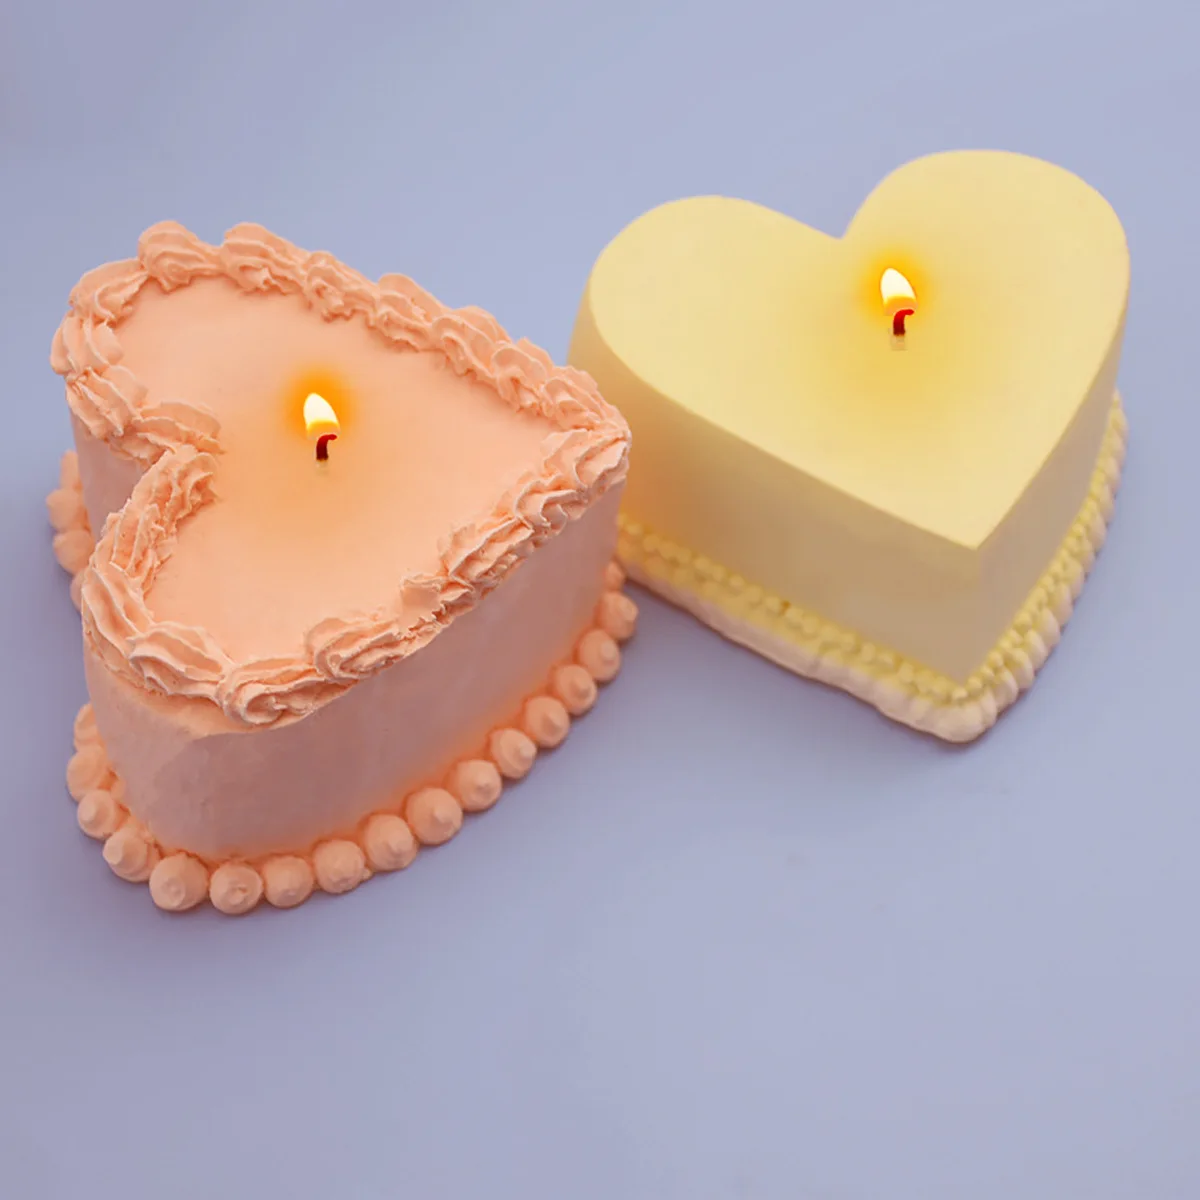 

DIY Three-dimensional Love Cake Chcolate Scented Candle Clay Plaster Decoration Silicone Fondant Mold Baking Pastry Cake Tools